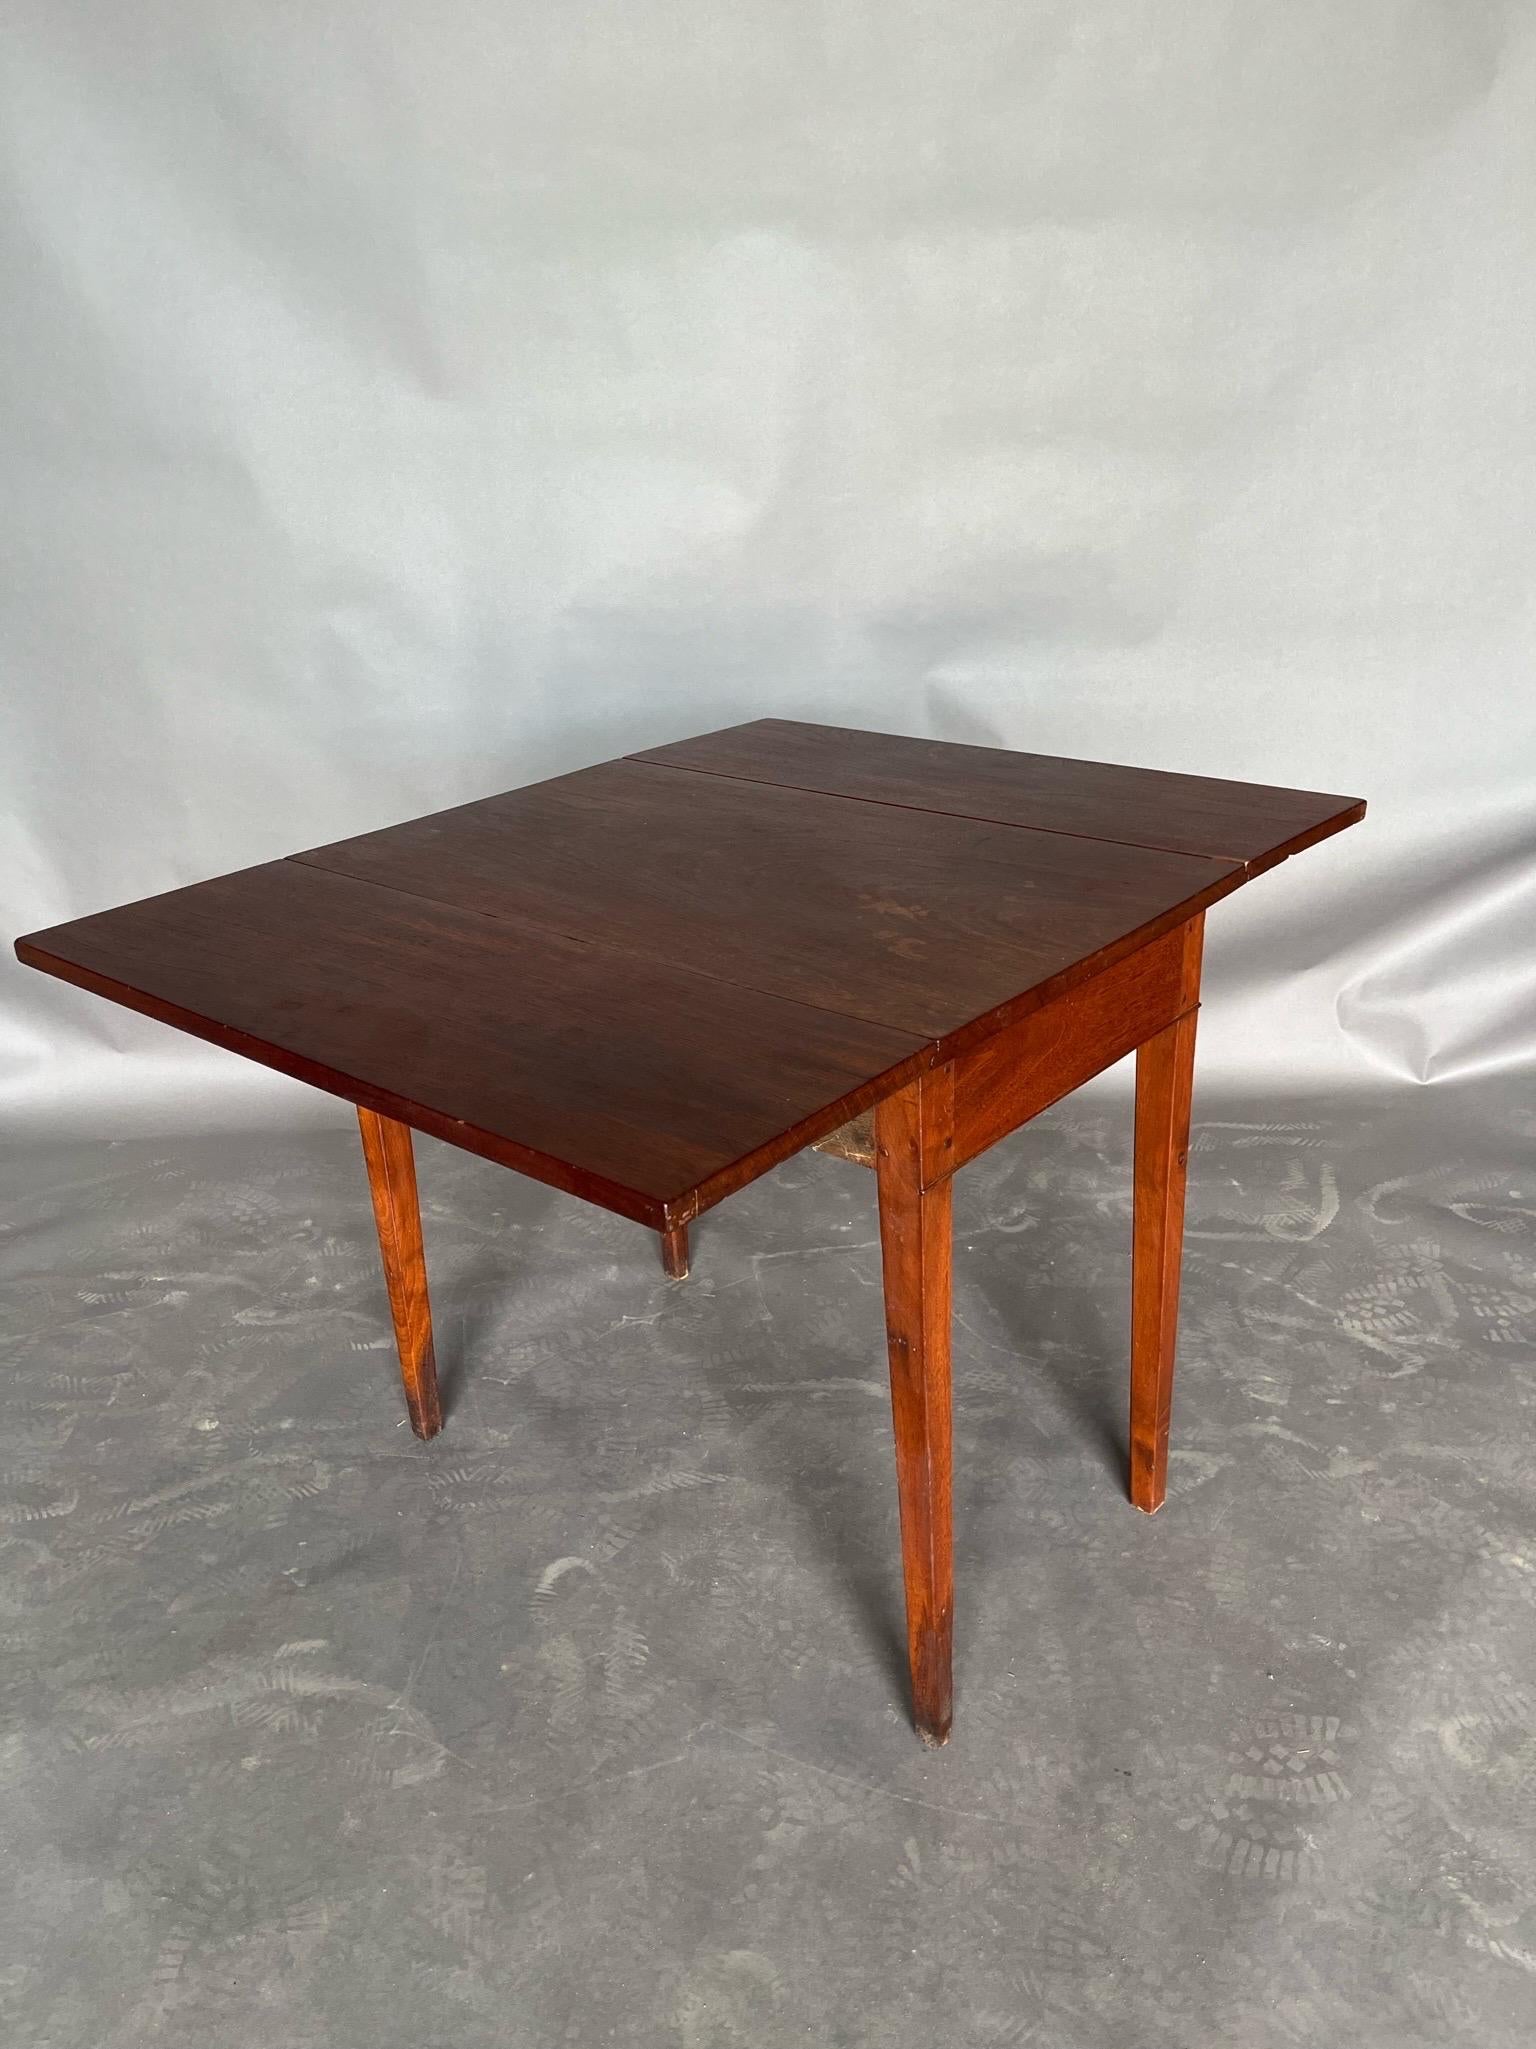 18th Century Virginia Tidewater Walnut and Yellow Pine Drop Leaf Table  For Sale 2